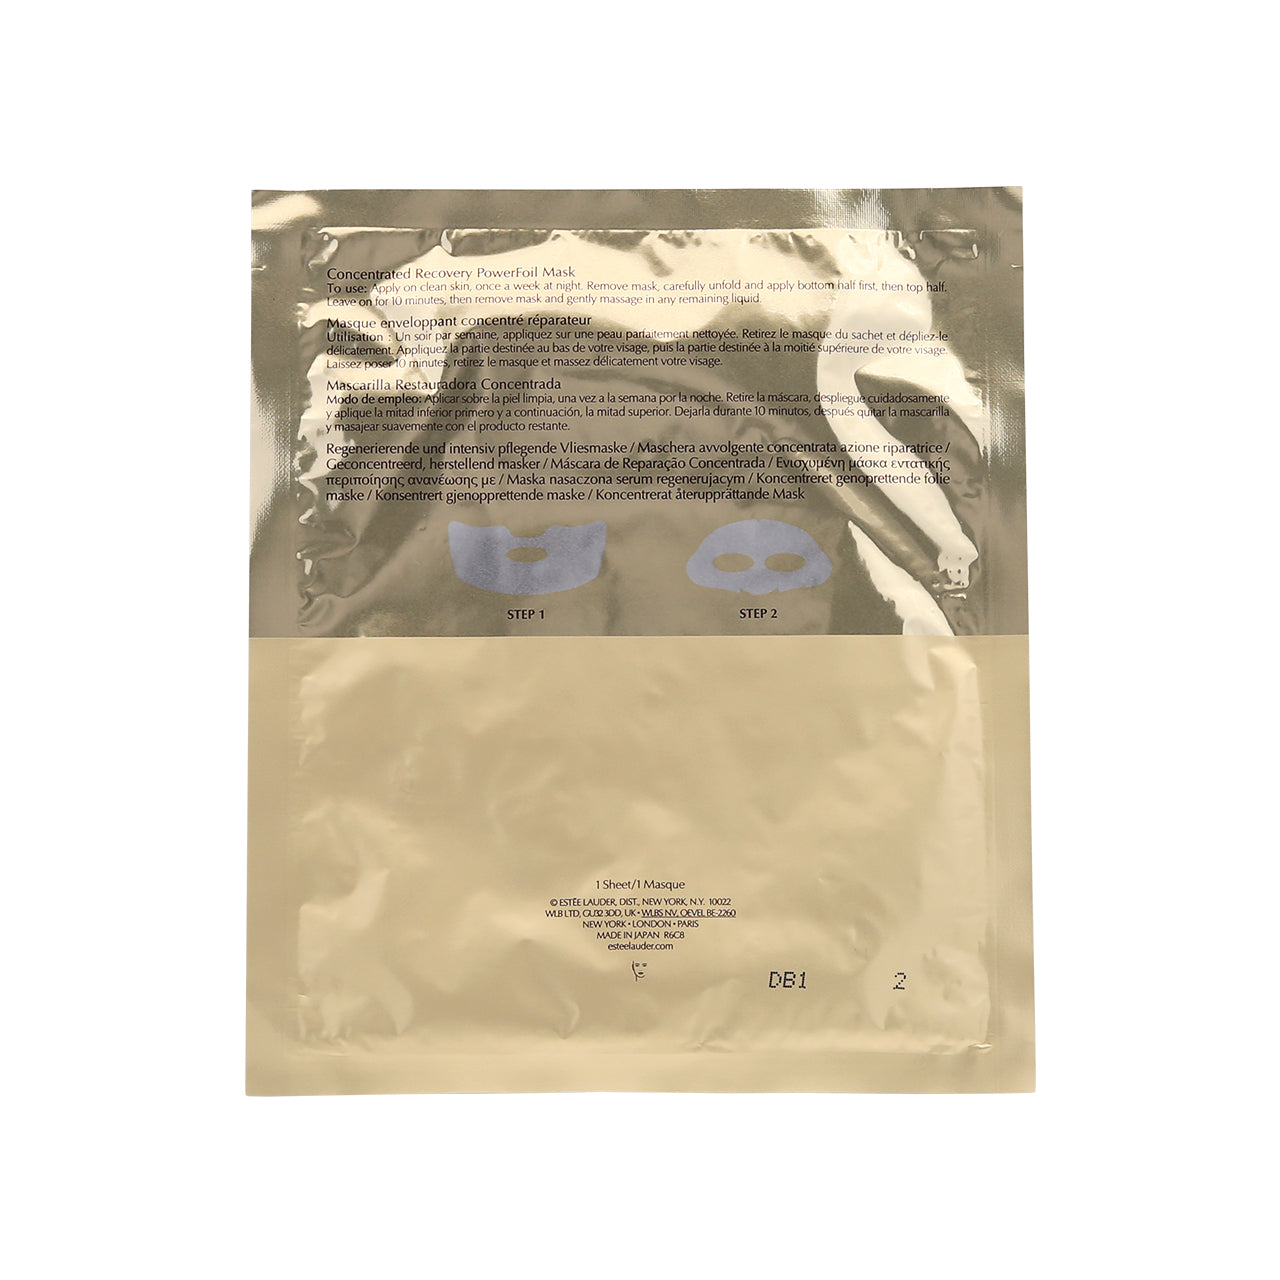 Estee Lauder Advanced Night Repair Concentrated Recovery PowerFoil Mask 8pcs